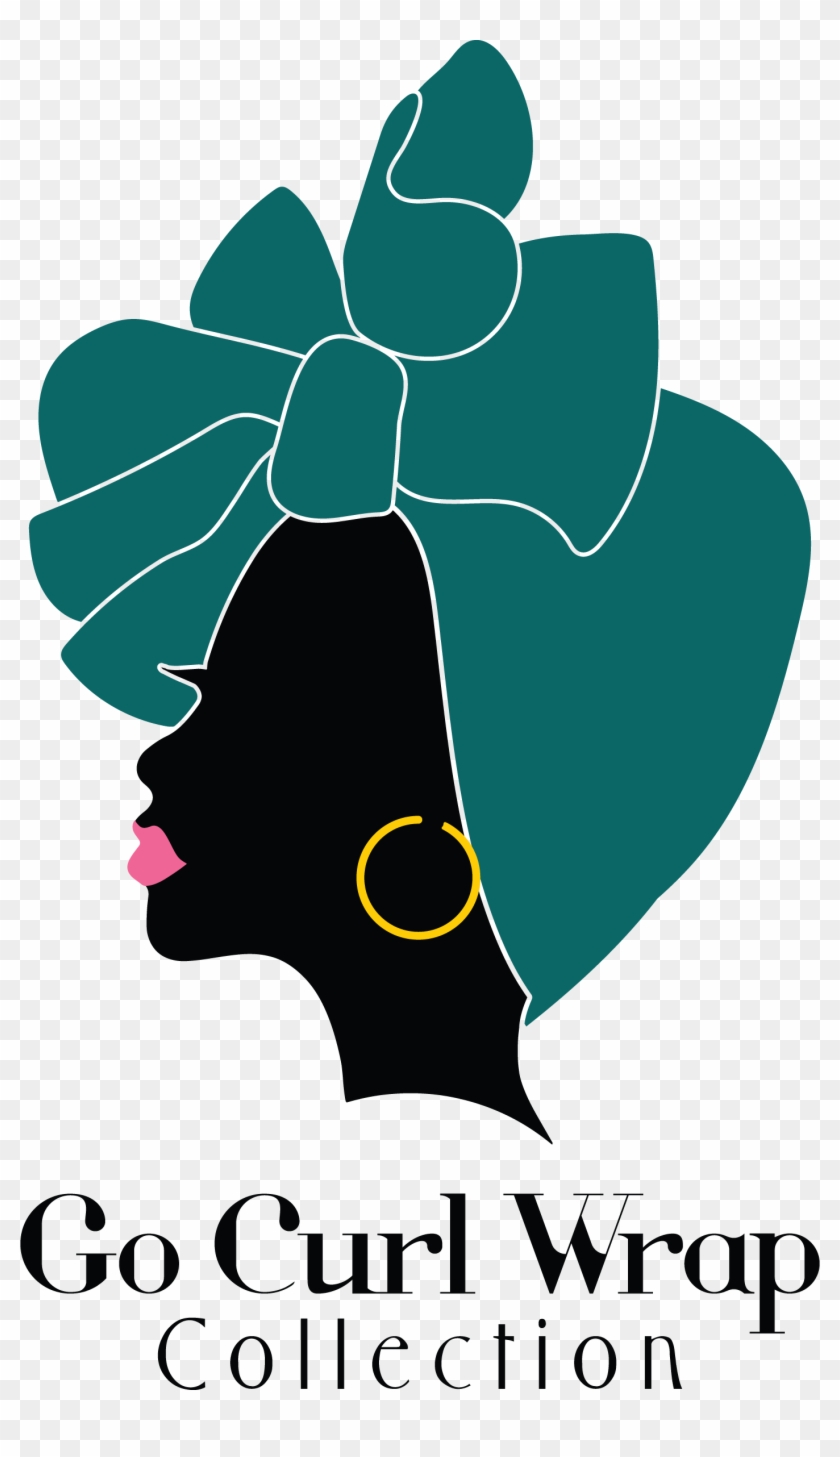 African Head Wraps - African Head Wraps #1708544